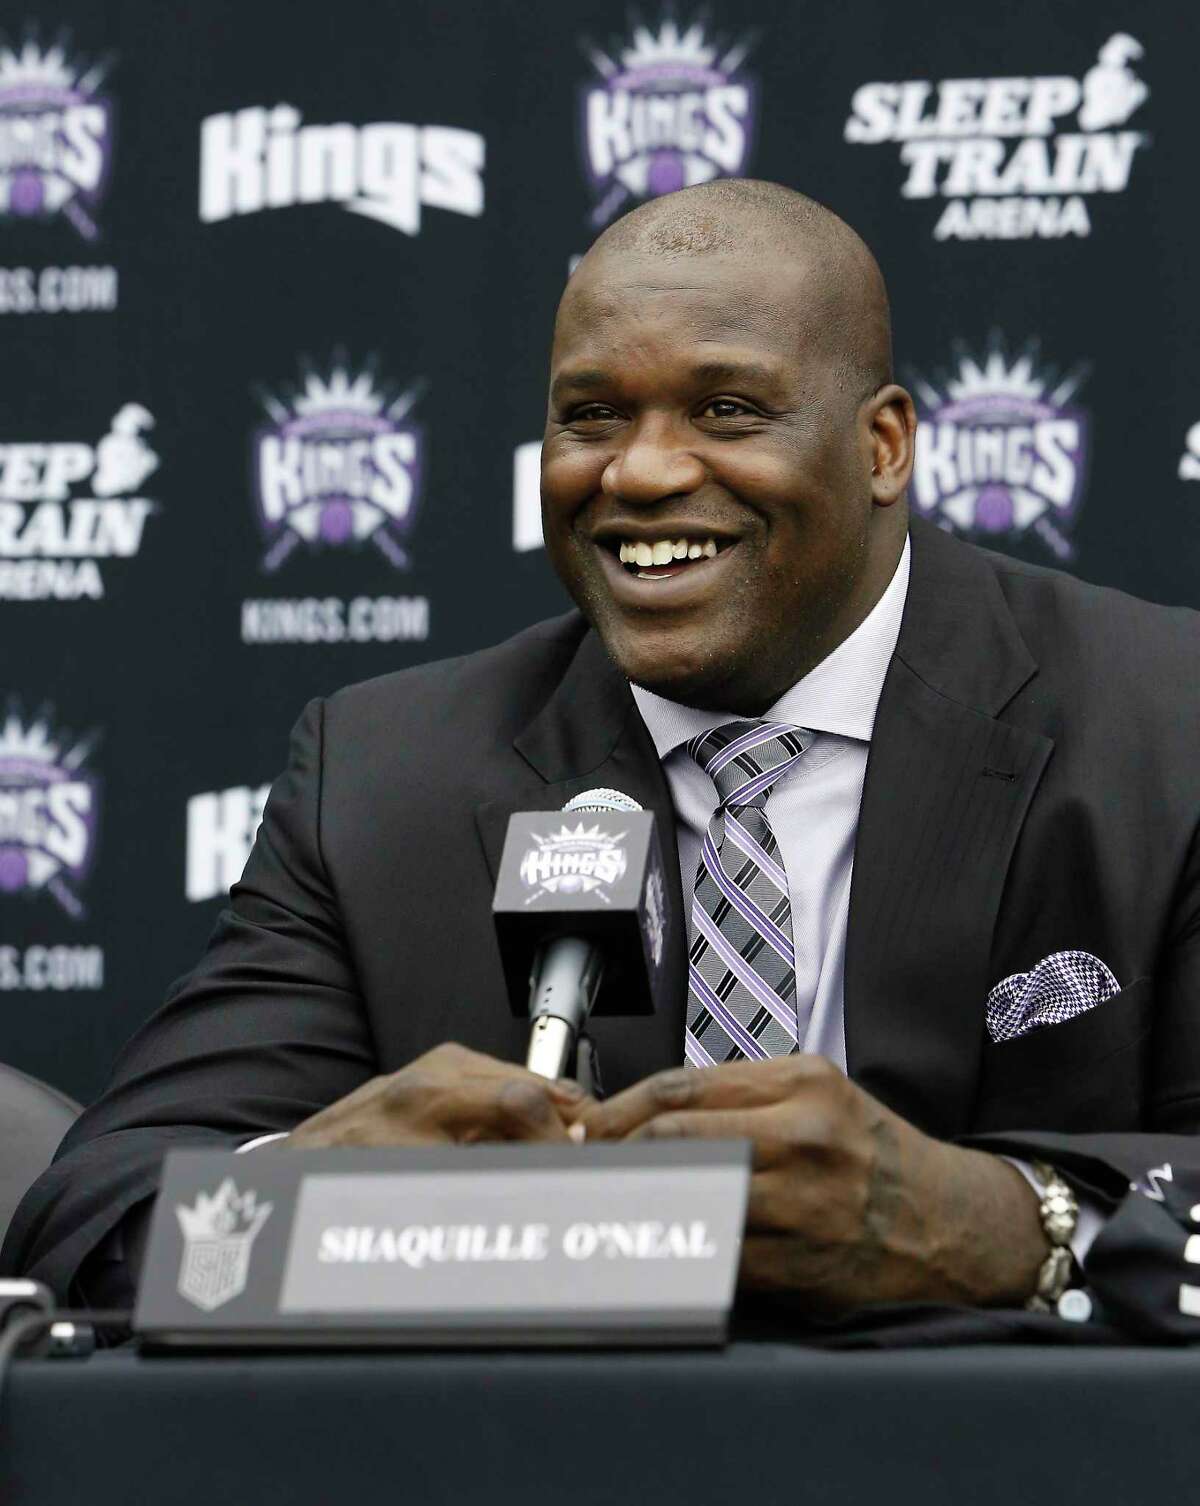 In this Sept. 24, 2013 photo, Shaquille O’Neal smiles during a news conference where he was welcomed as one of the new minority owners of the Sacramento Kings in Sacramento, Calif.